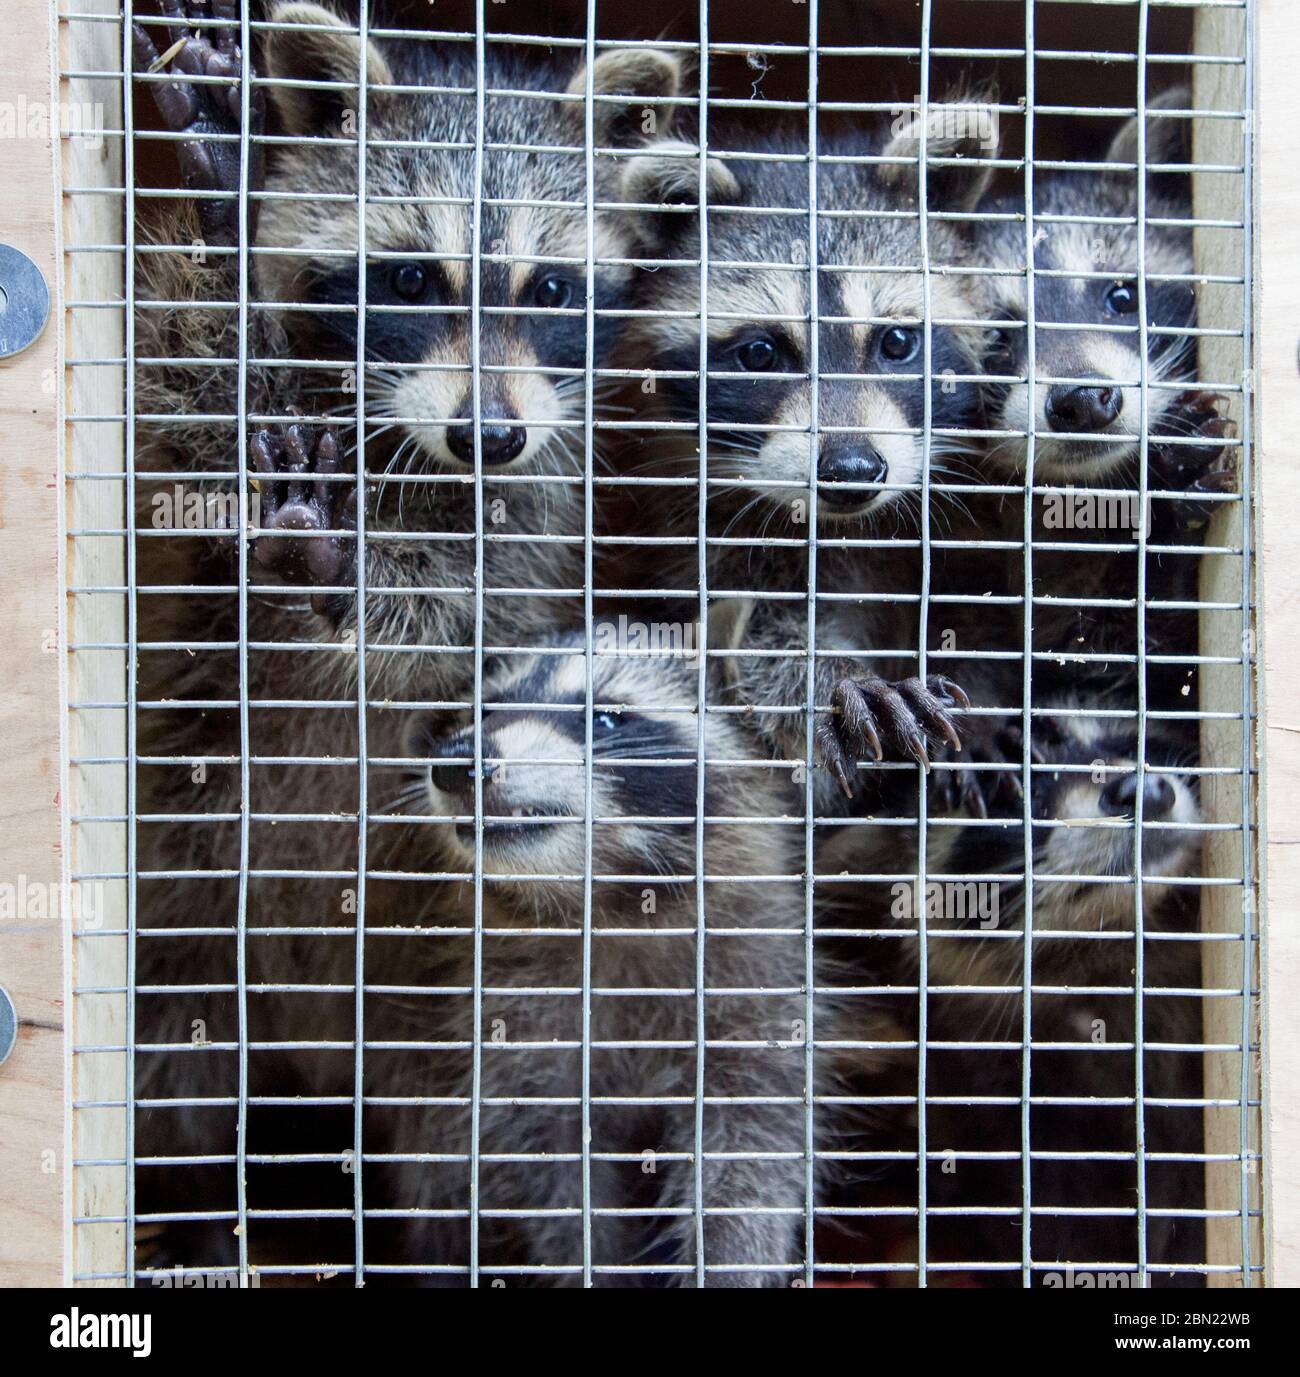 Five raccoons look out from their enclosure at the home of a wildlife rehabber in Massachusetts, USA Stock Photo